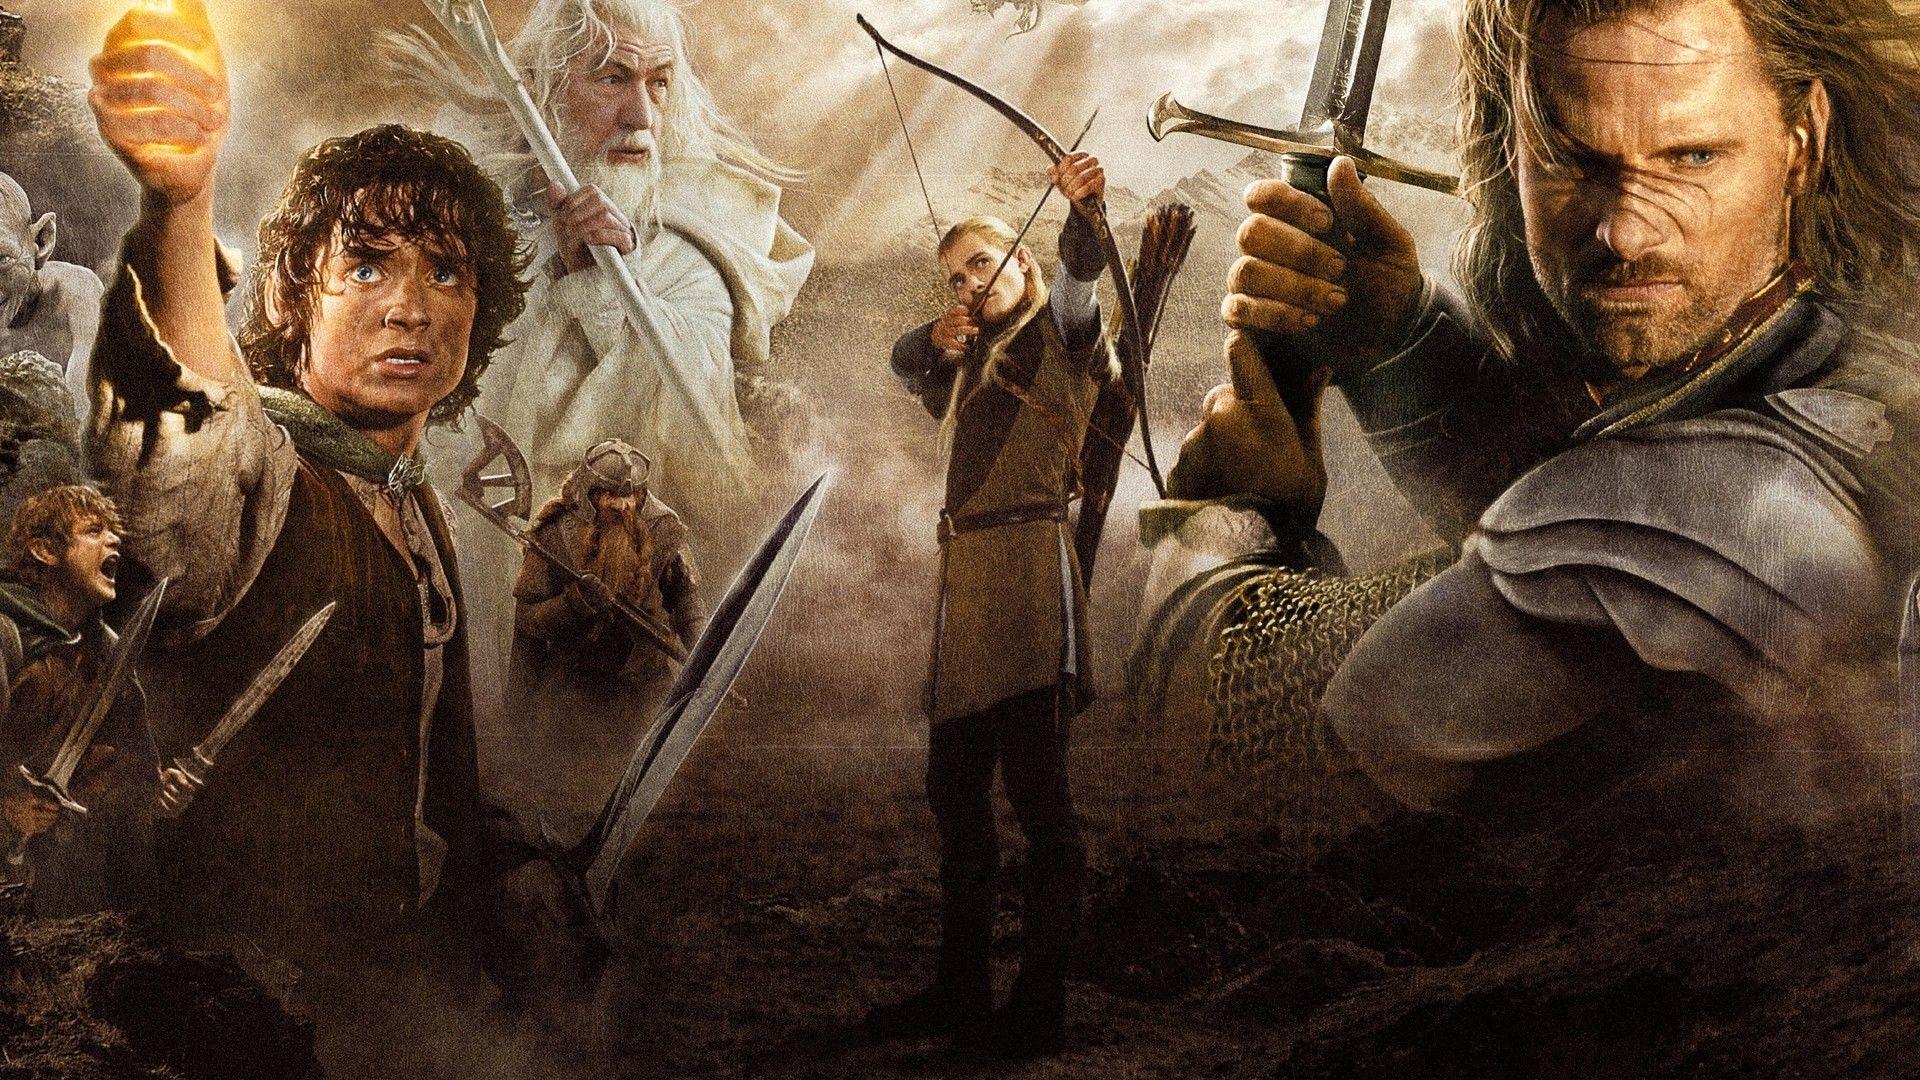 movies, The Lord Of The Rings, The Lord Of The Rings: The Return